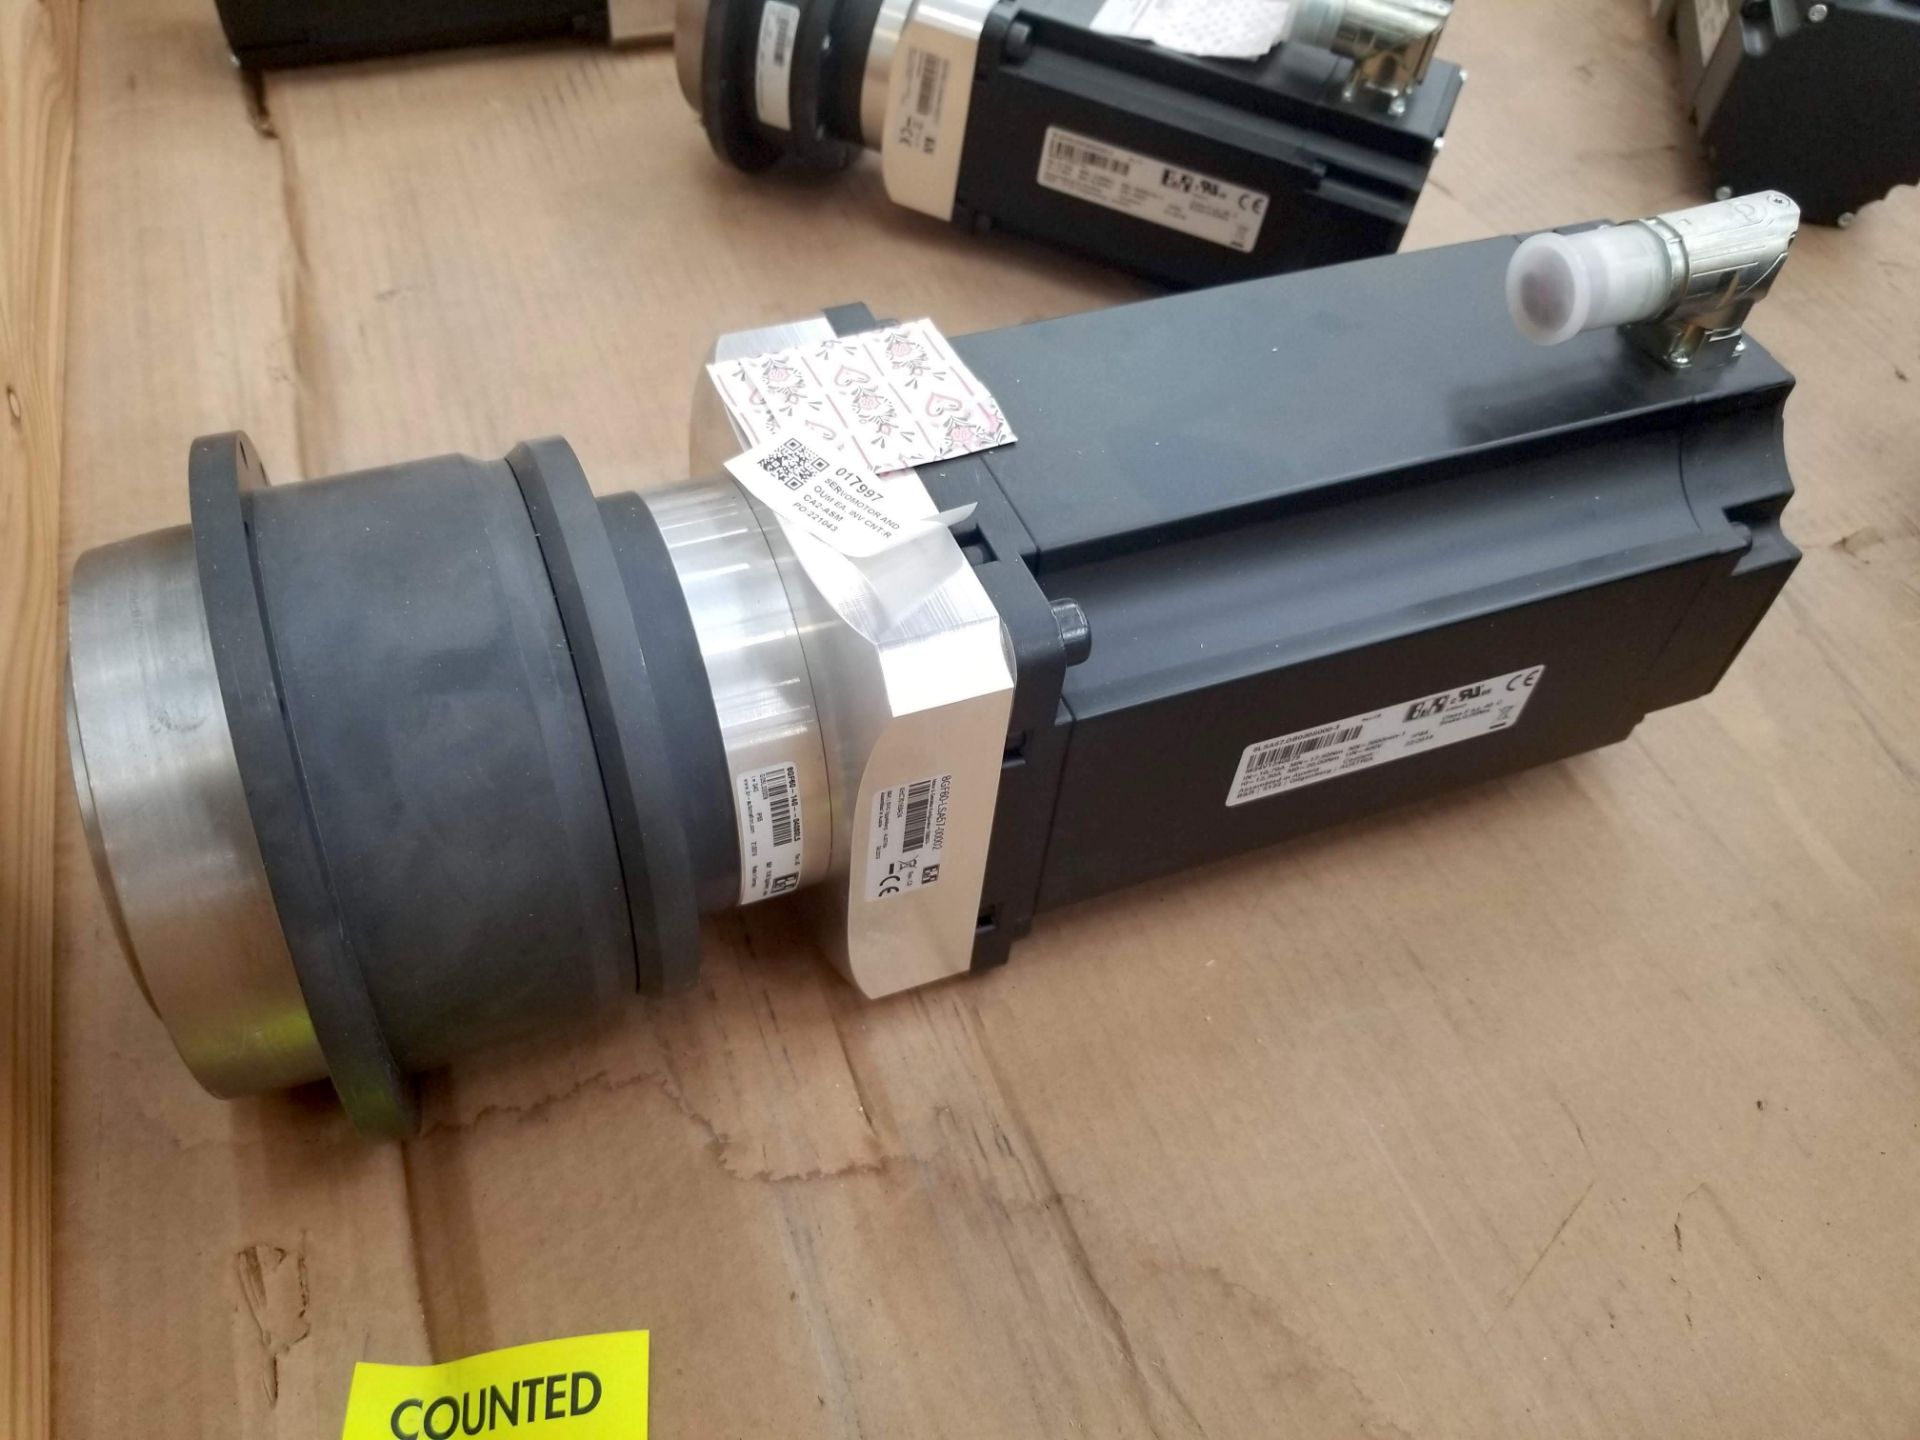 LOT - (6) B&R MOTOR & GEARBOX, SHUTTER N350. MOTOR & GEARBOX ROBOT. SERVOMOTOR AND GEARBOX. - Image 12 of 21